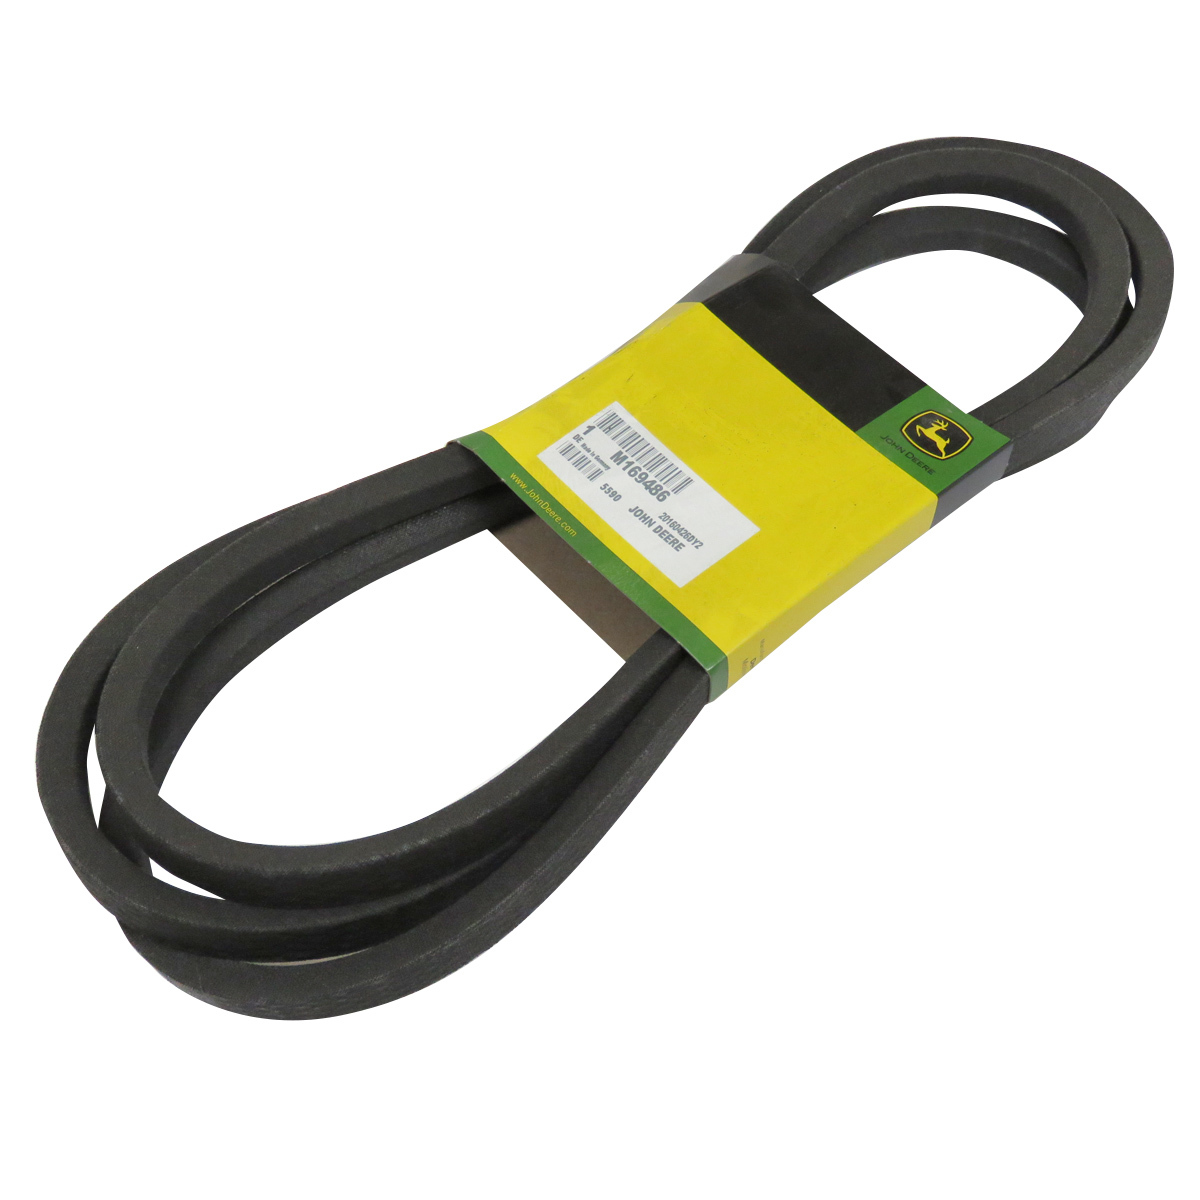 X534 and X540 with 54 Deck 5/8 X 120 1/2 Deck Belt for John Deere M154960 X340 X520 X500